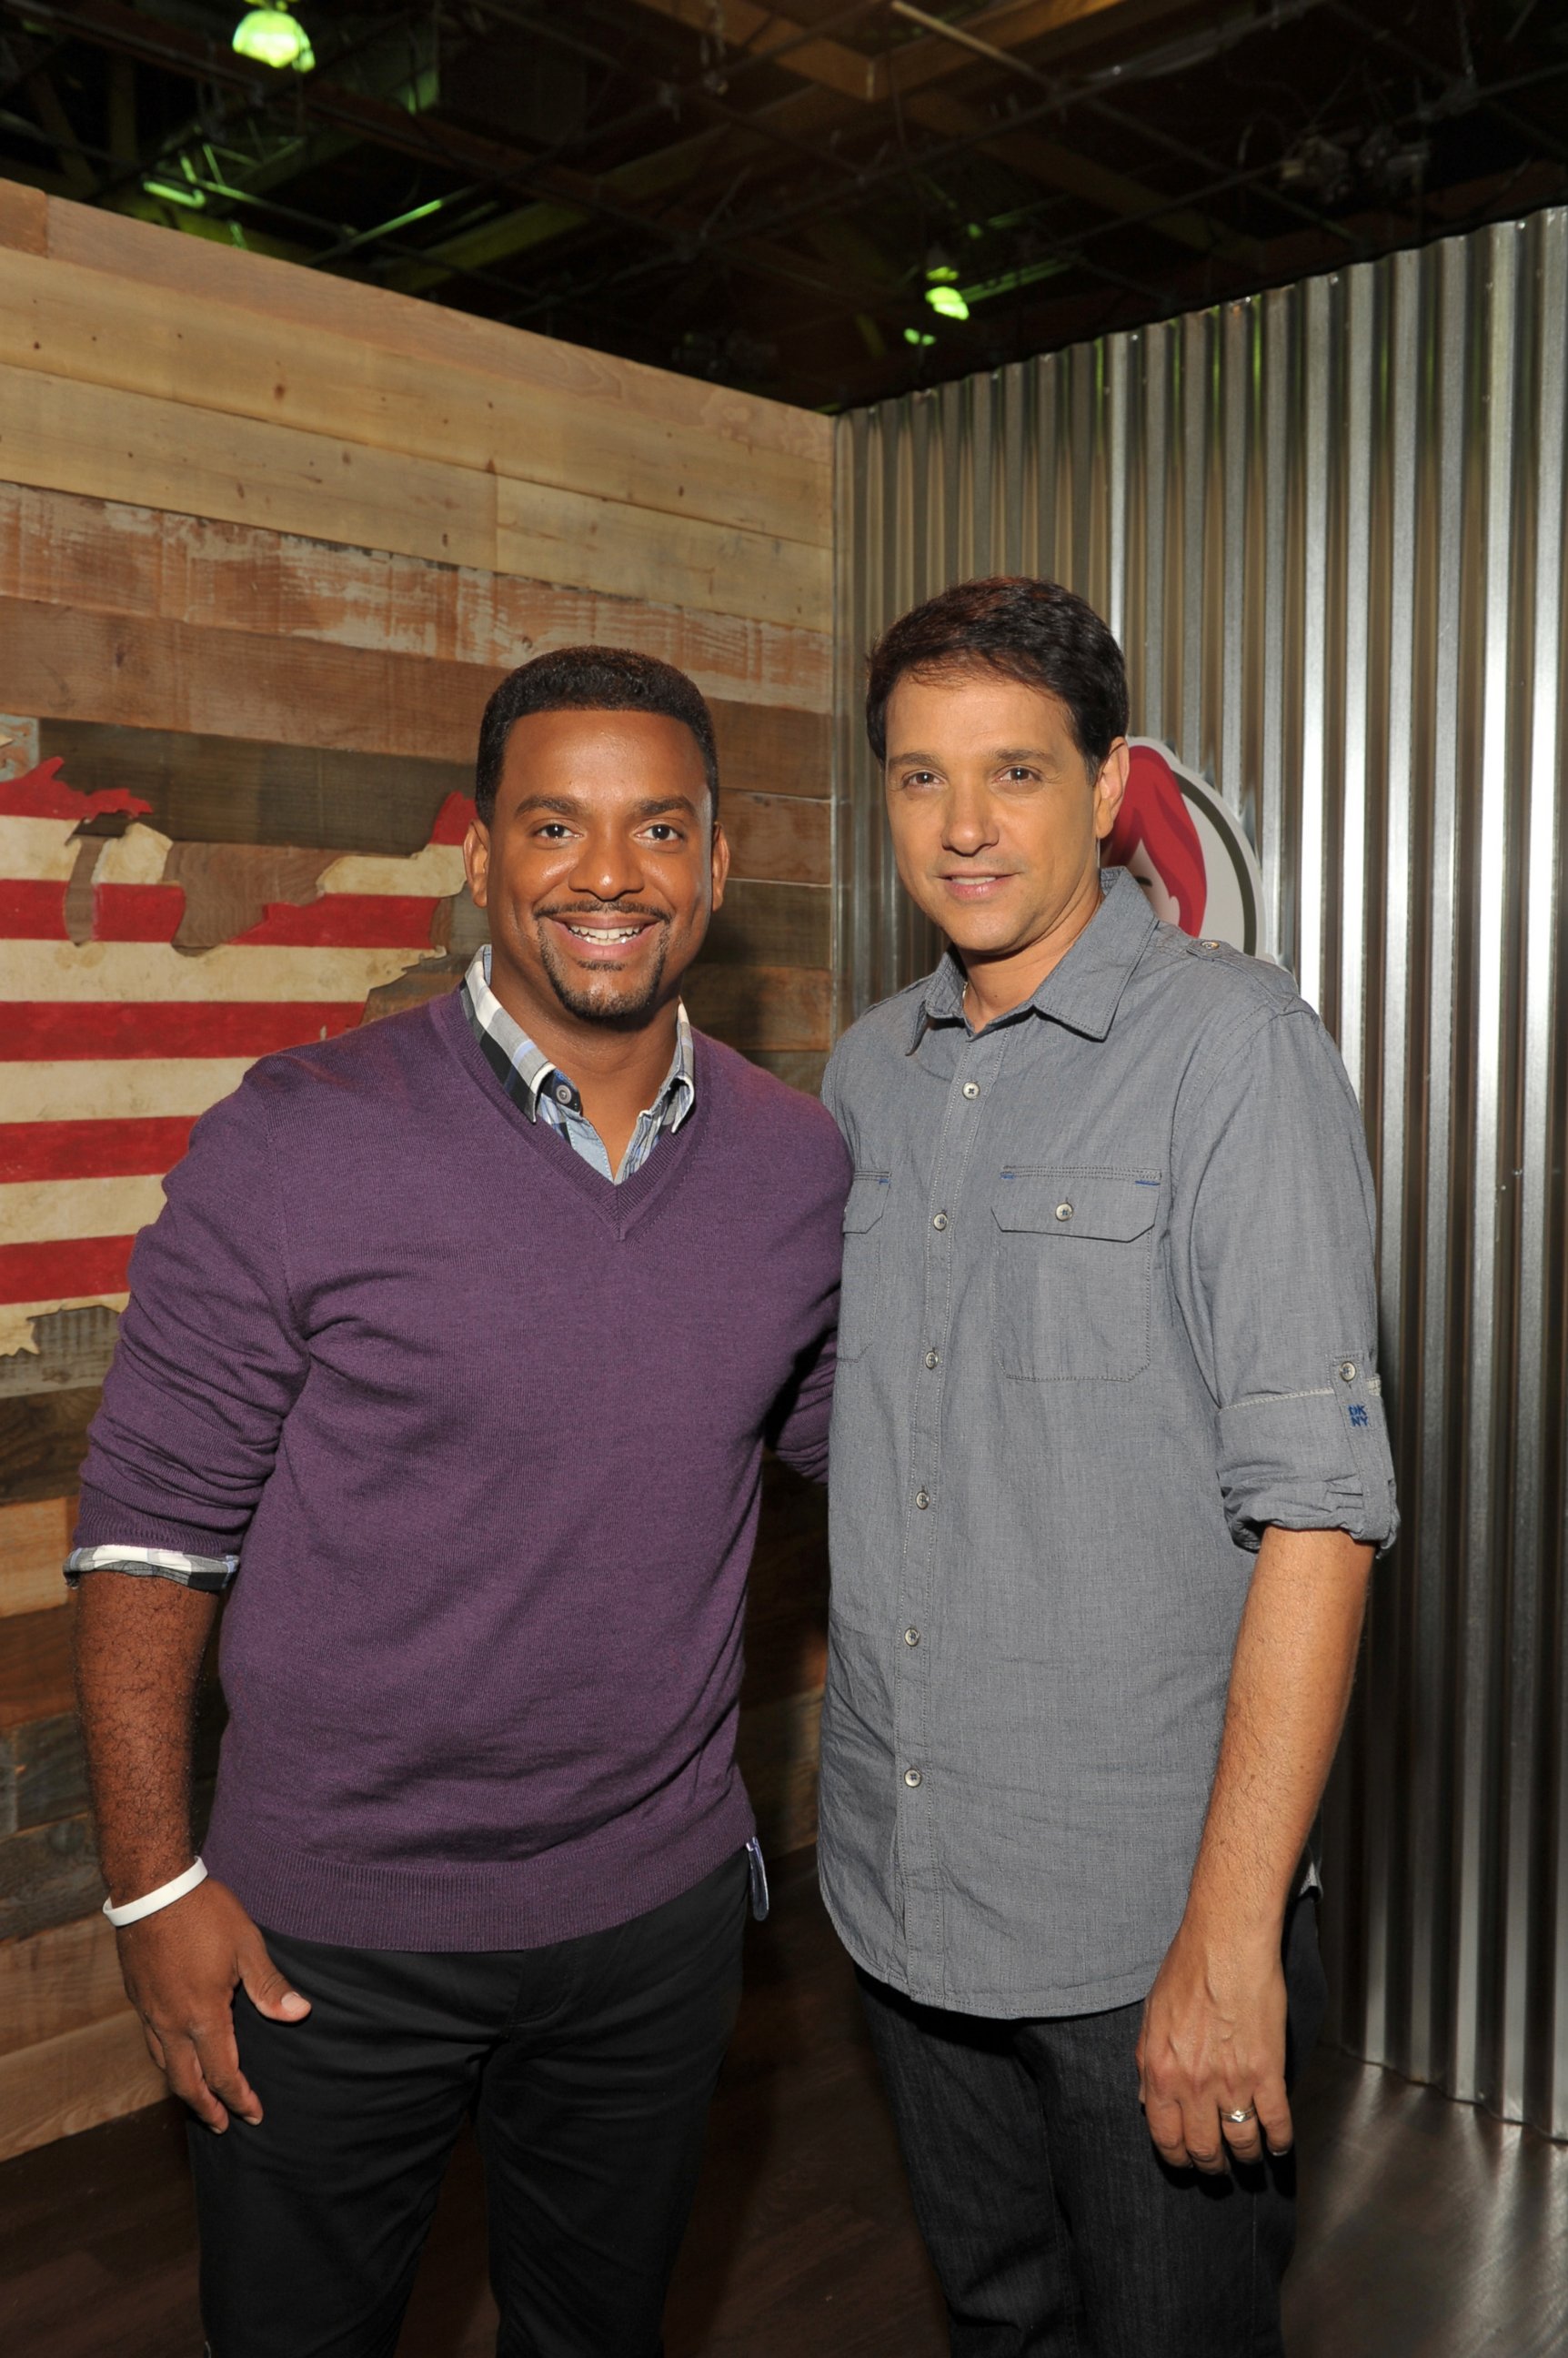 PHOTO: Actor and dancer Alfonso Ribeiro and actor and filmmaker Ralph Macchio unite for a common cause: to join Wendy's in the effort to spread the news that good BBQ is now available to everyone with Wendy's new BBQ Pulled Pork offerings.